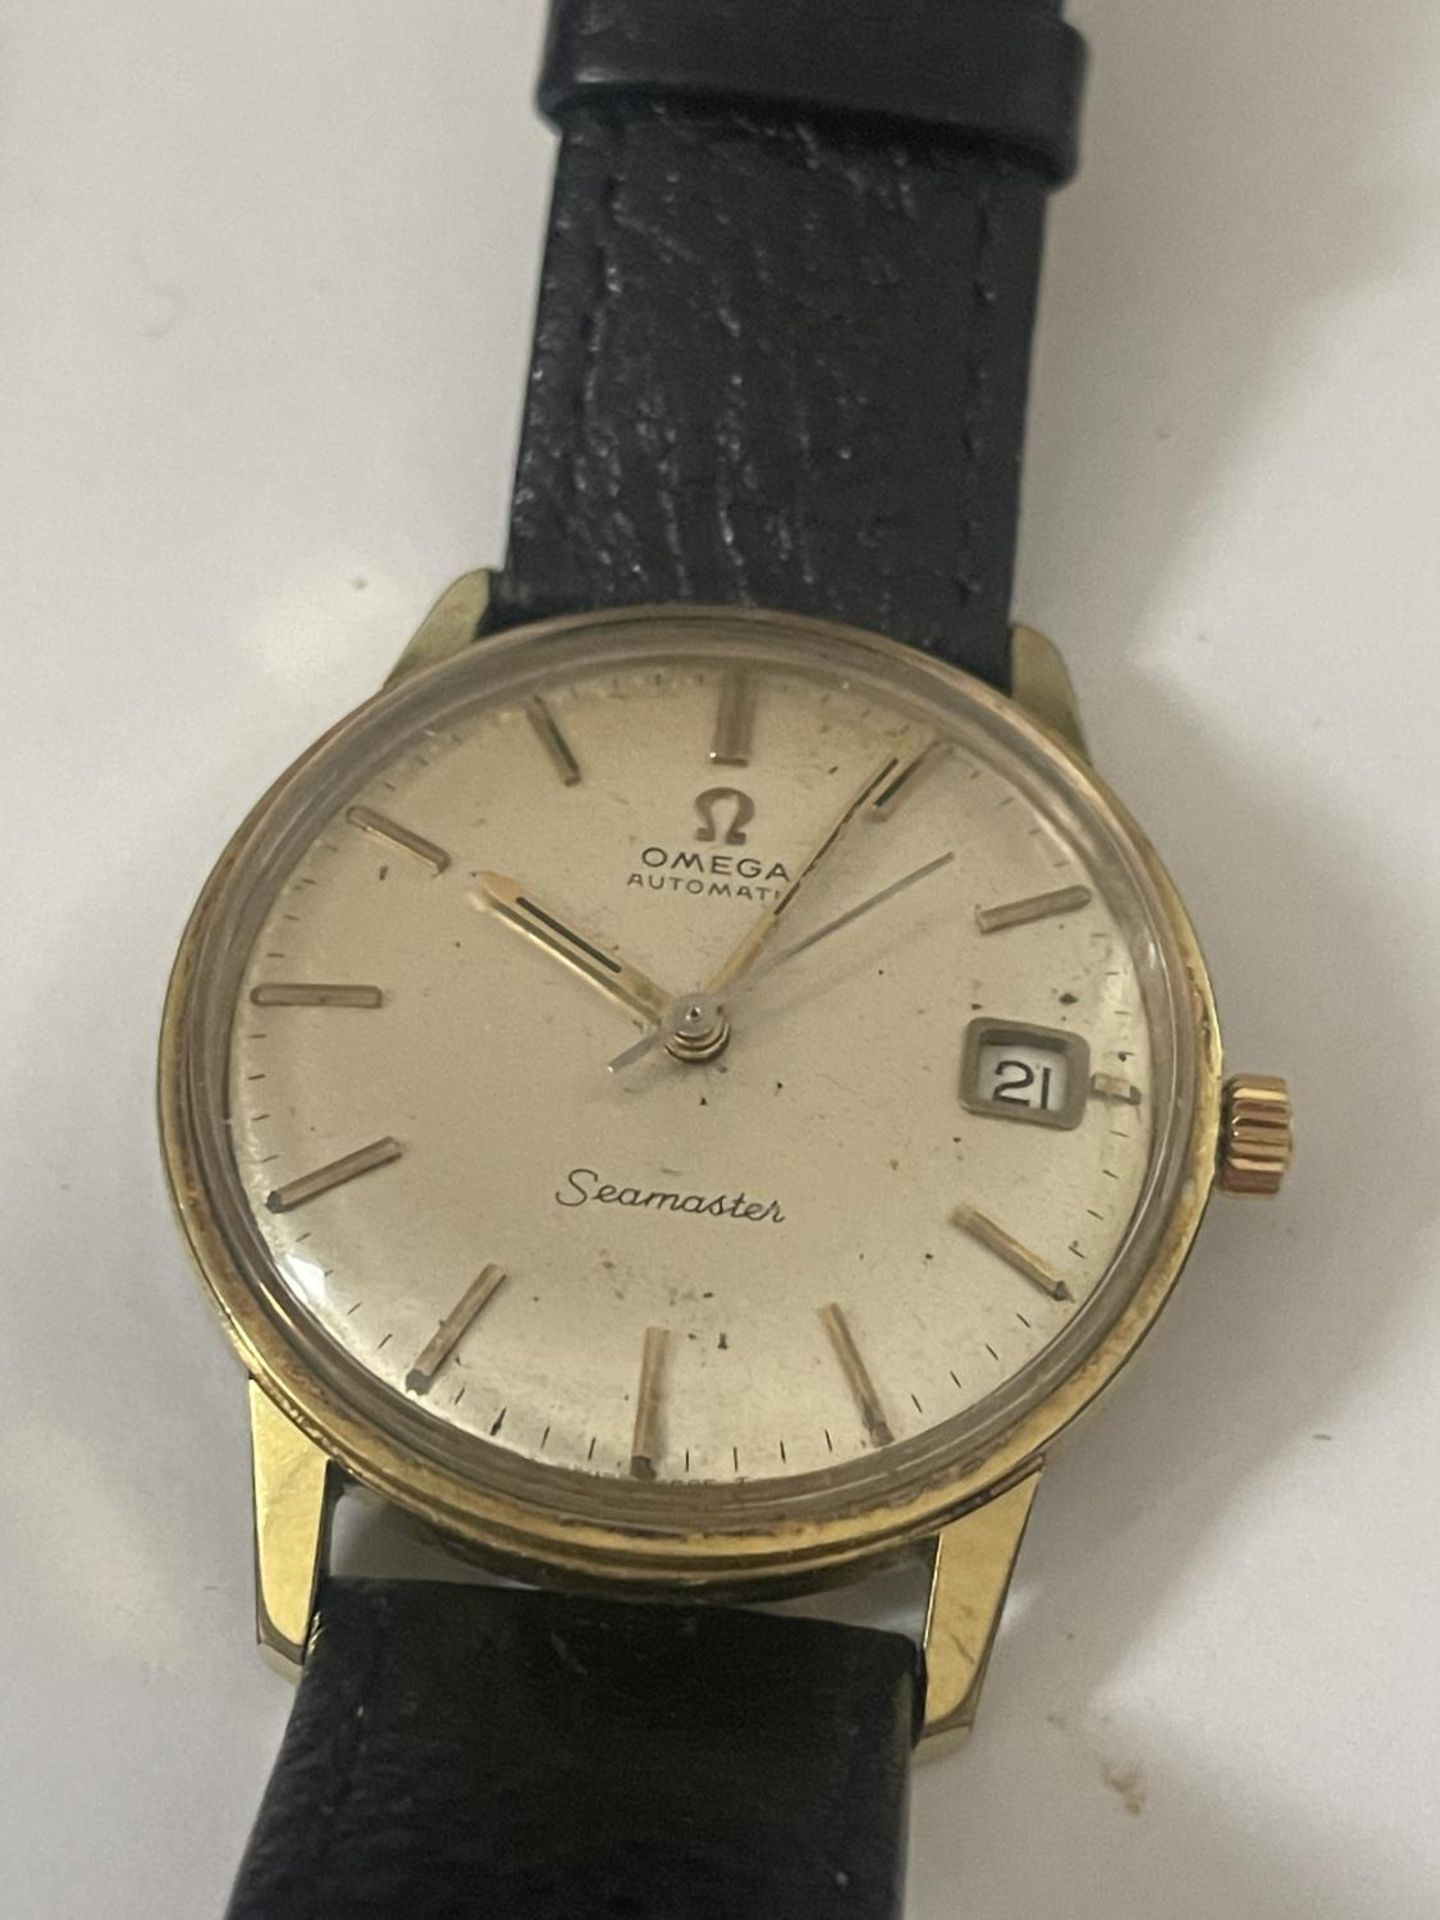 A 1968 OMEGA SEAMASTER WATCH WITH ORIGINAL GUARANTEE, BOX, LEATHER STRAP AND METAL STRAP, SERVICE - Image 3 of 7